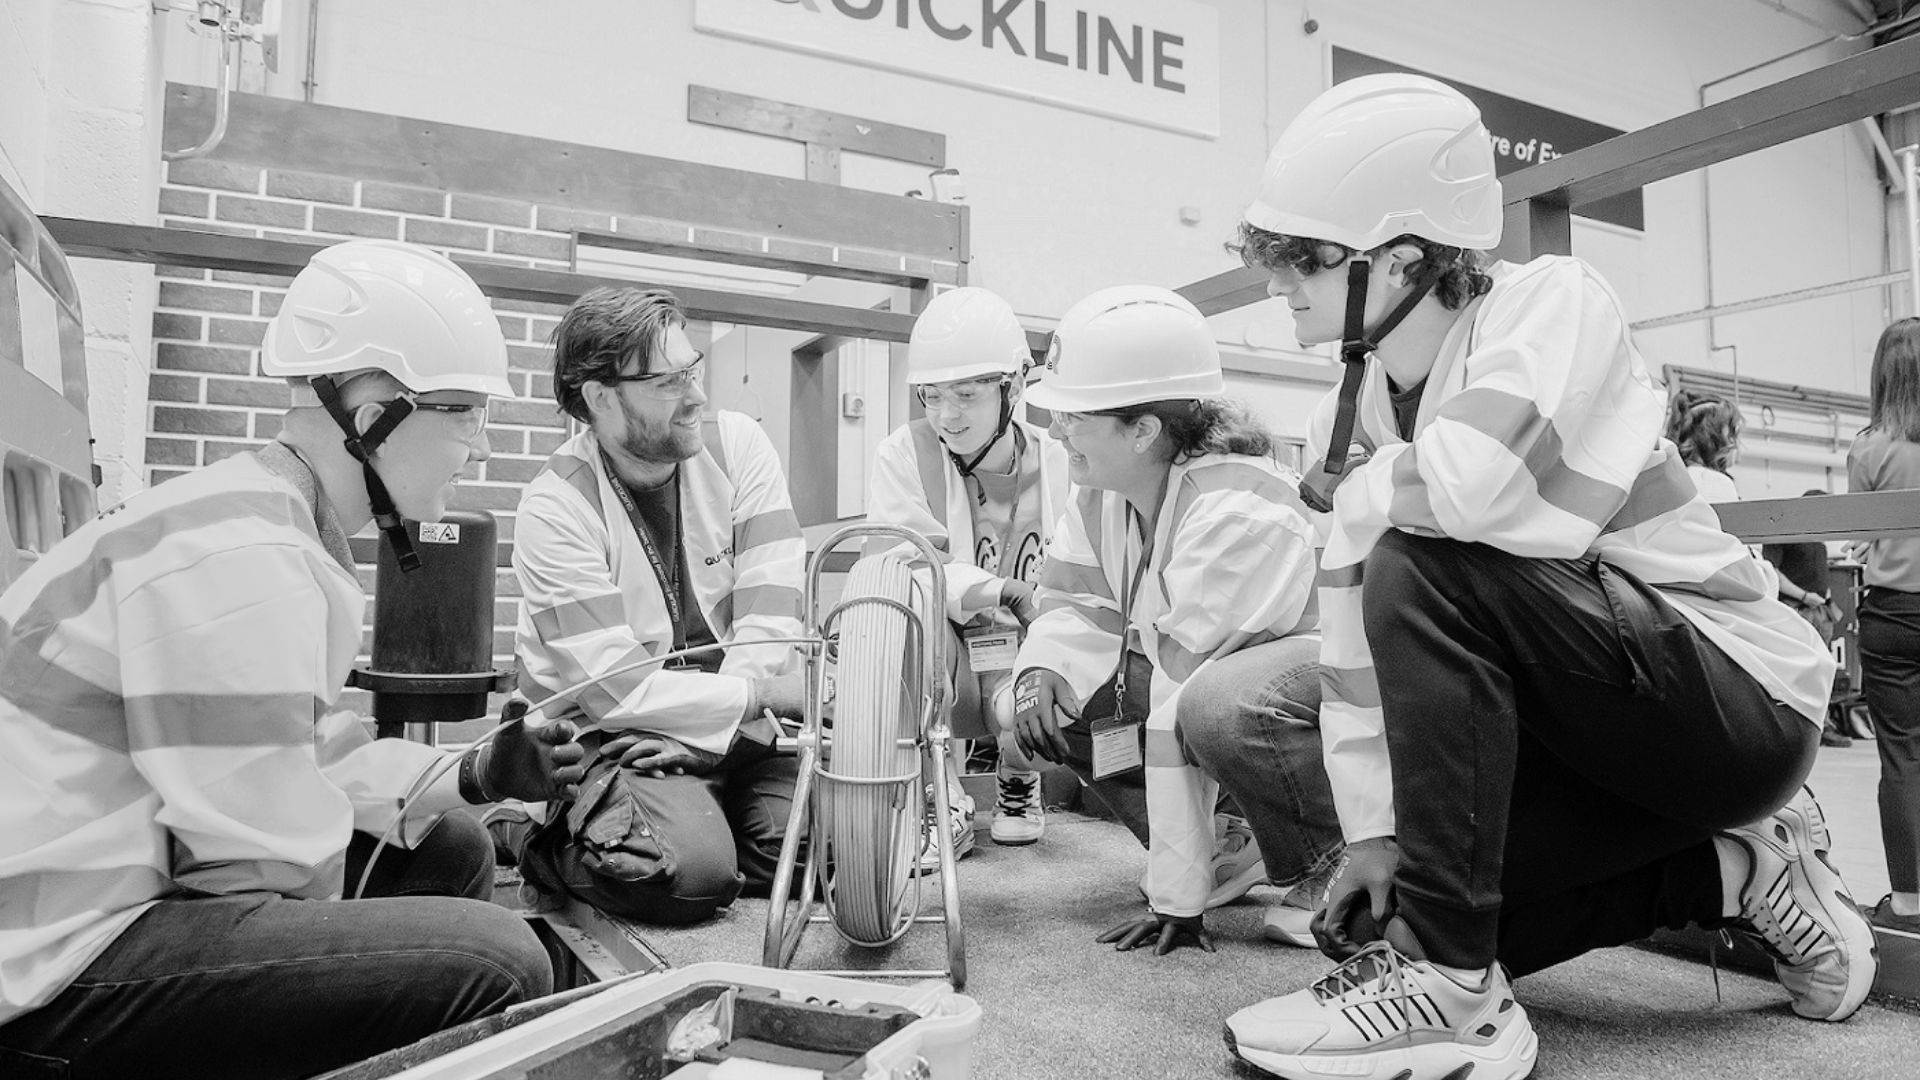 Quickline Inspires Students at New Training and Innovation Centre